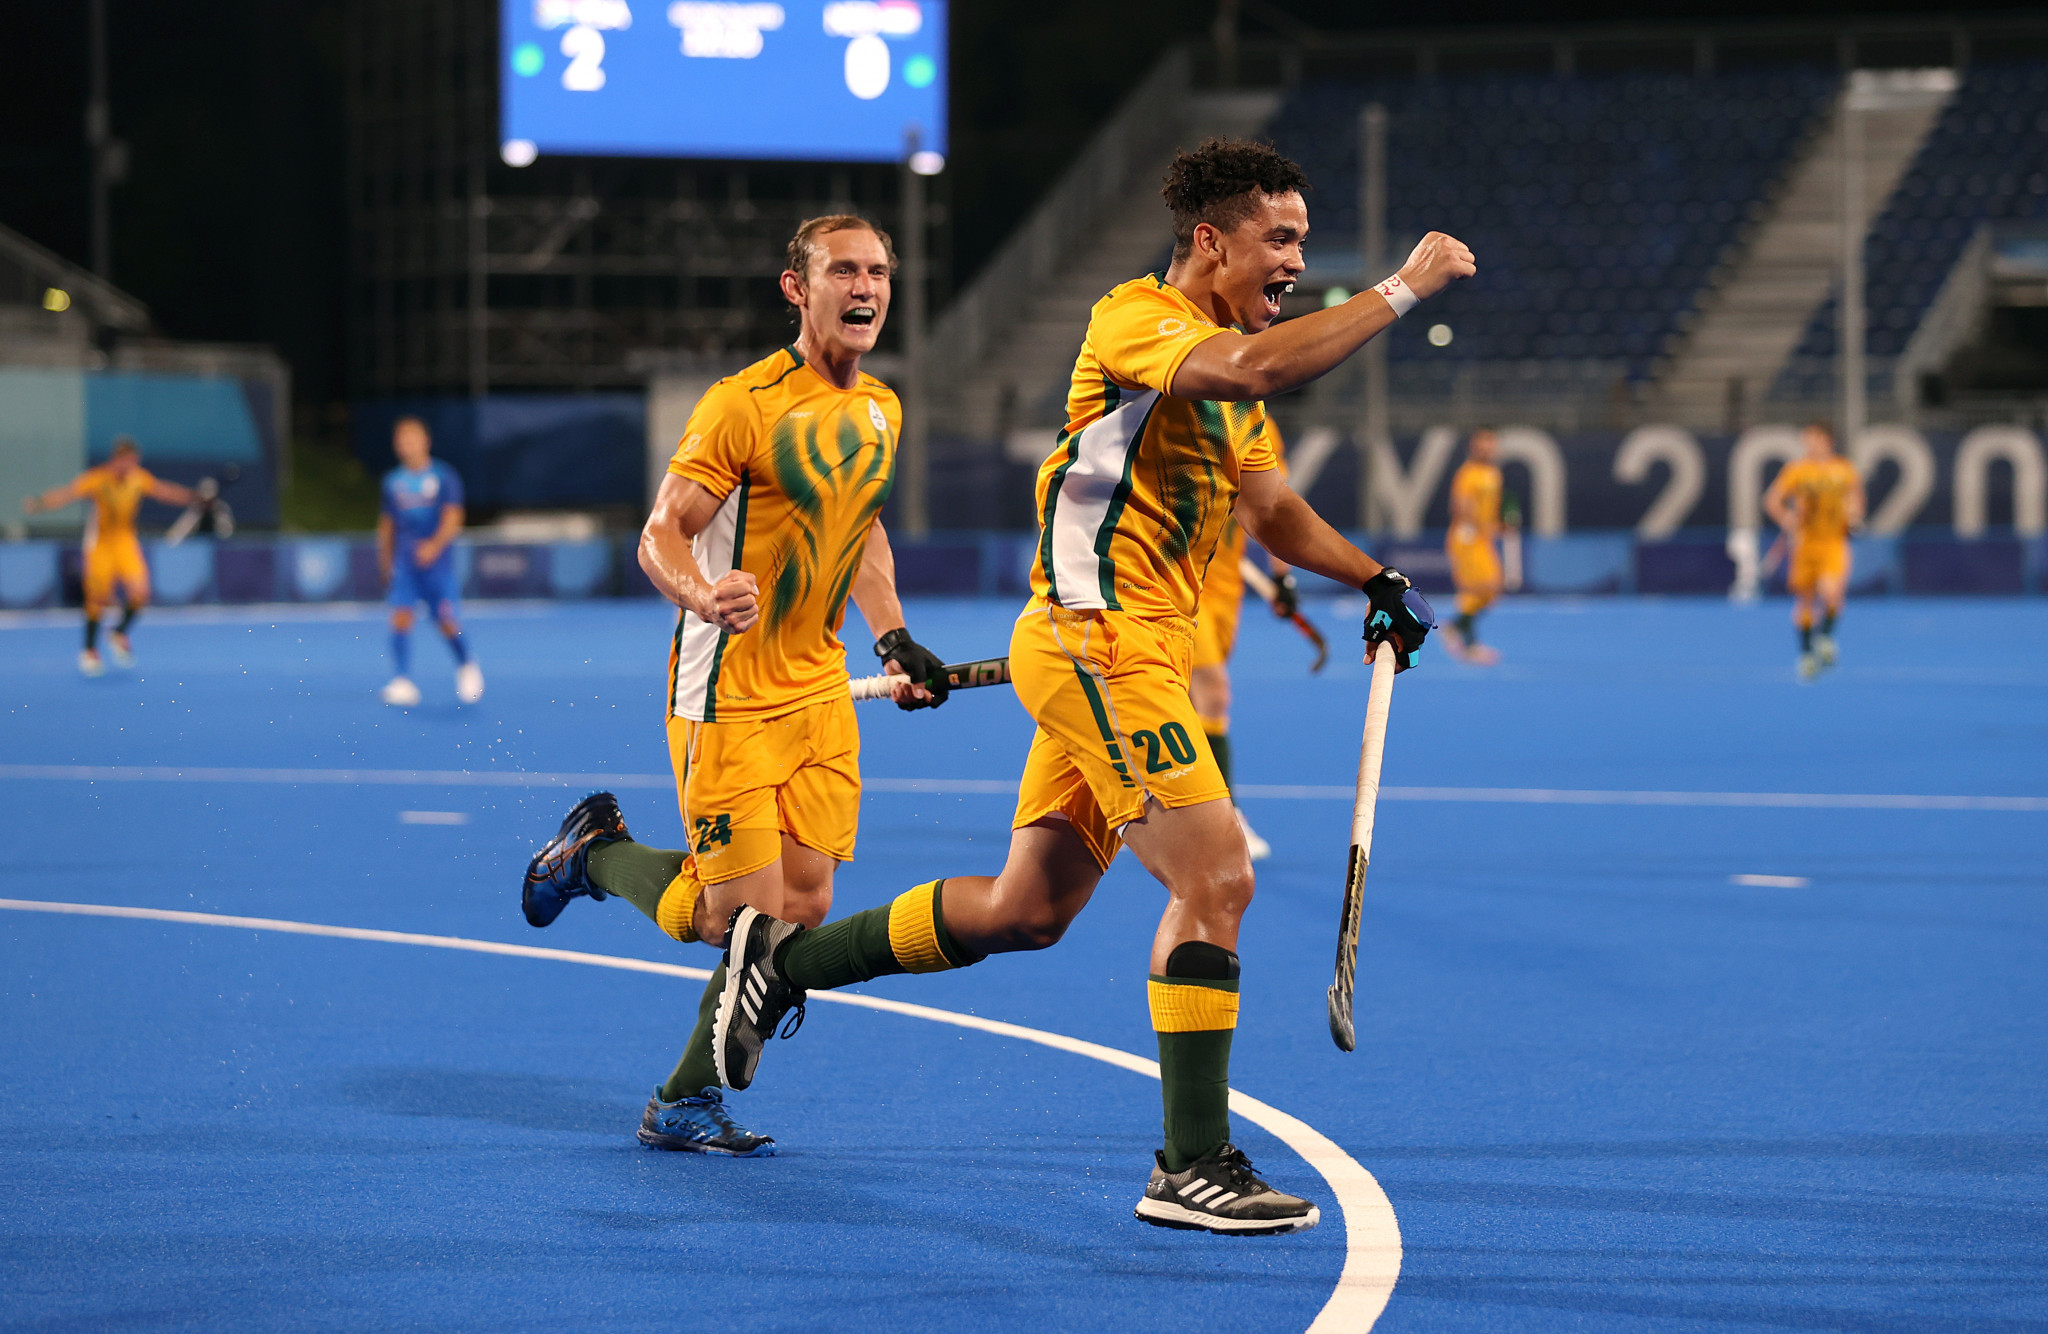 South Africa's men's hockey team are ranked 14th in the world by the FIH with the women's team placed 16th ©Getty Images